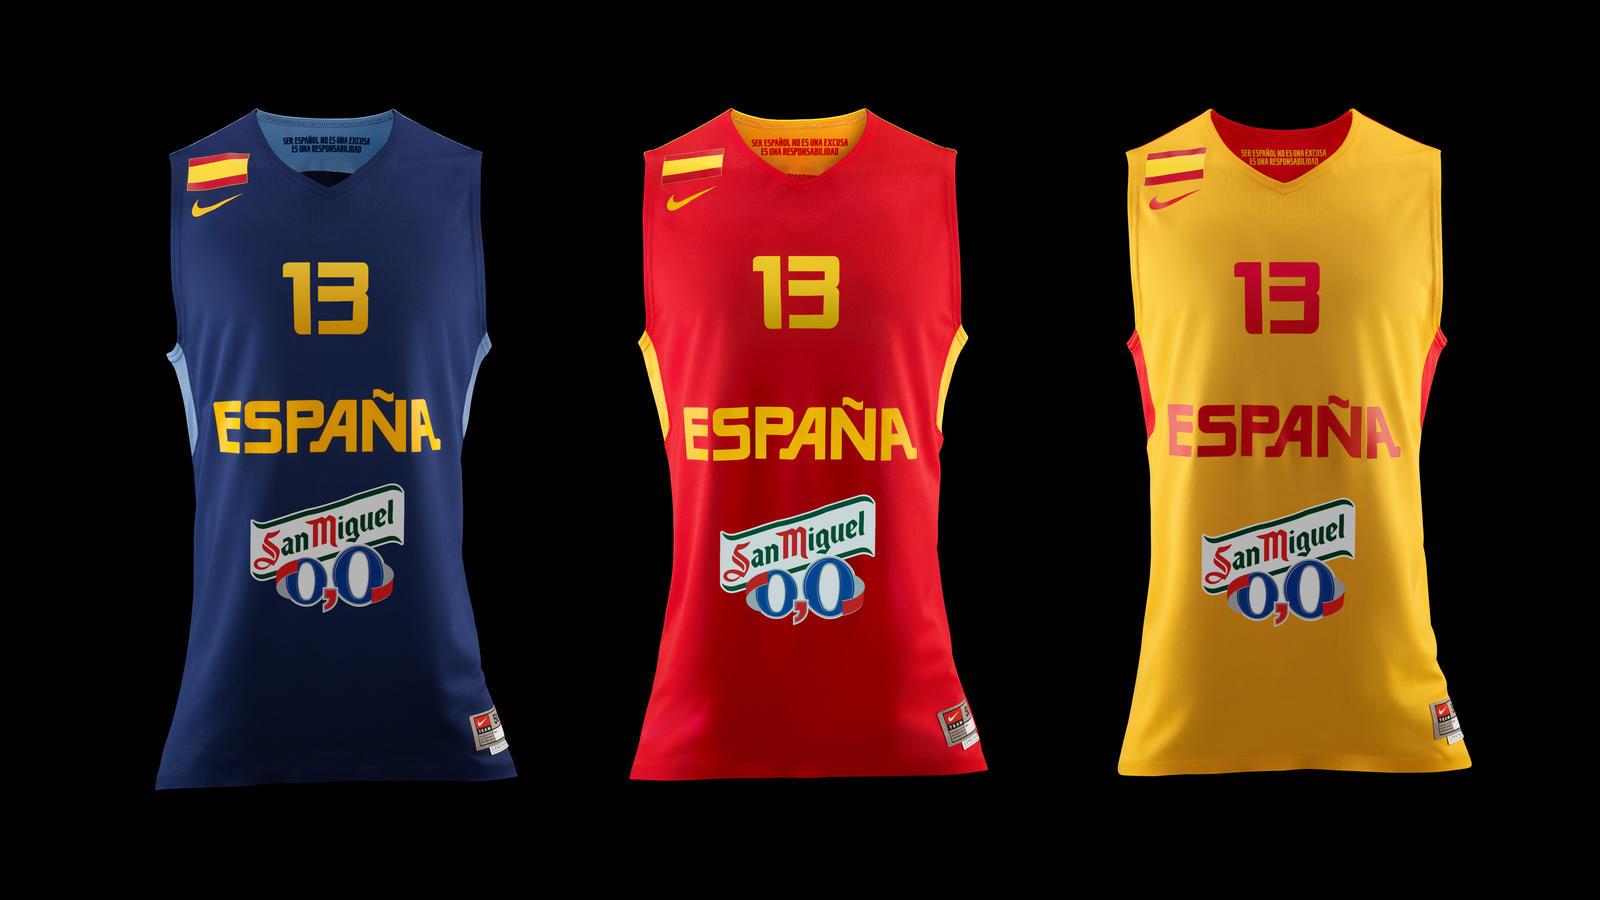 Nike unveils new Spanish National Basketball Team Collection